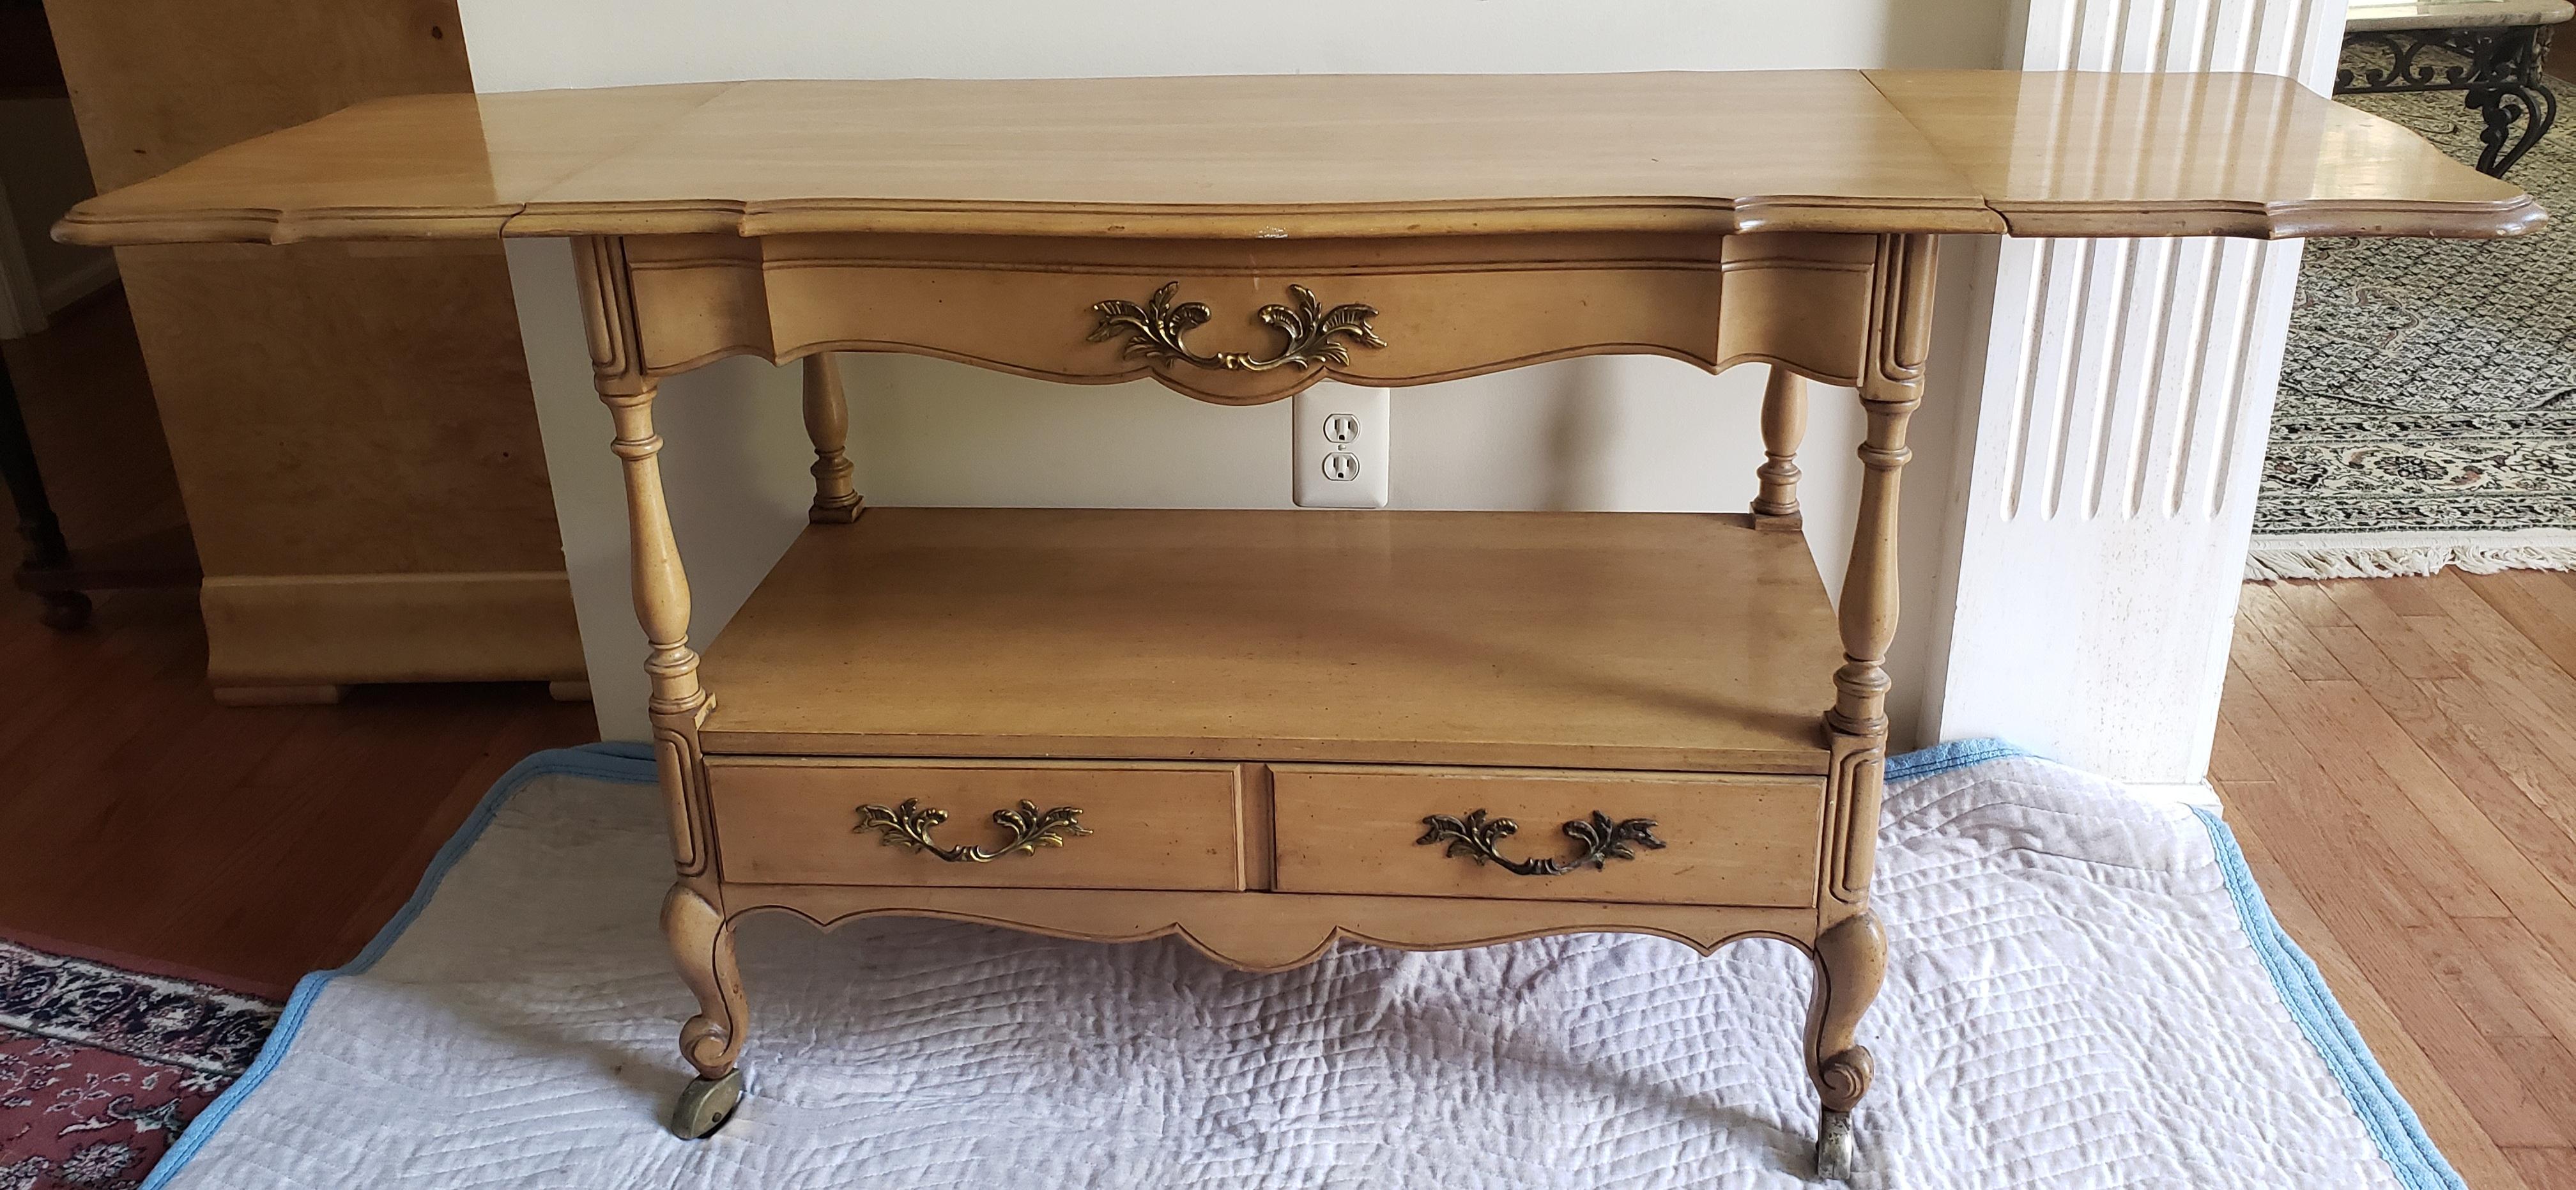 1960s French Provincial Drop Leaves Bar Cart Buffet Server w/ Silverware Drawers In Good Condition In Germantown, MD